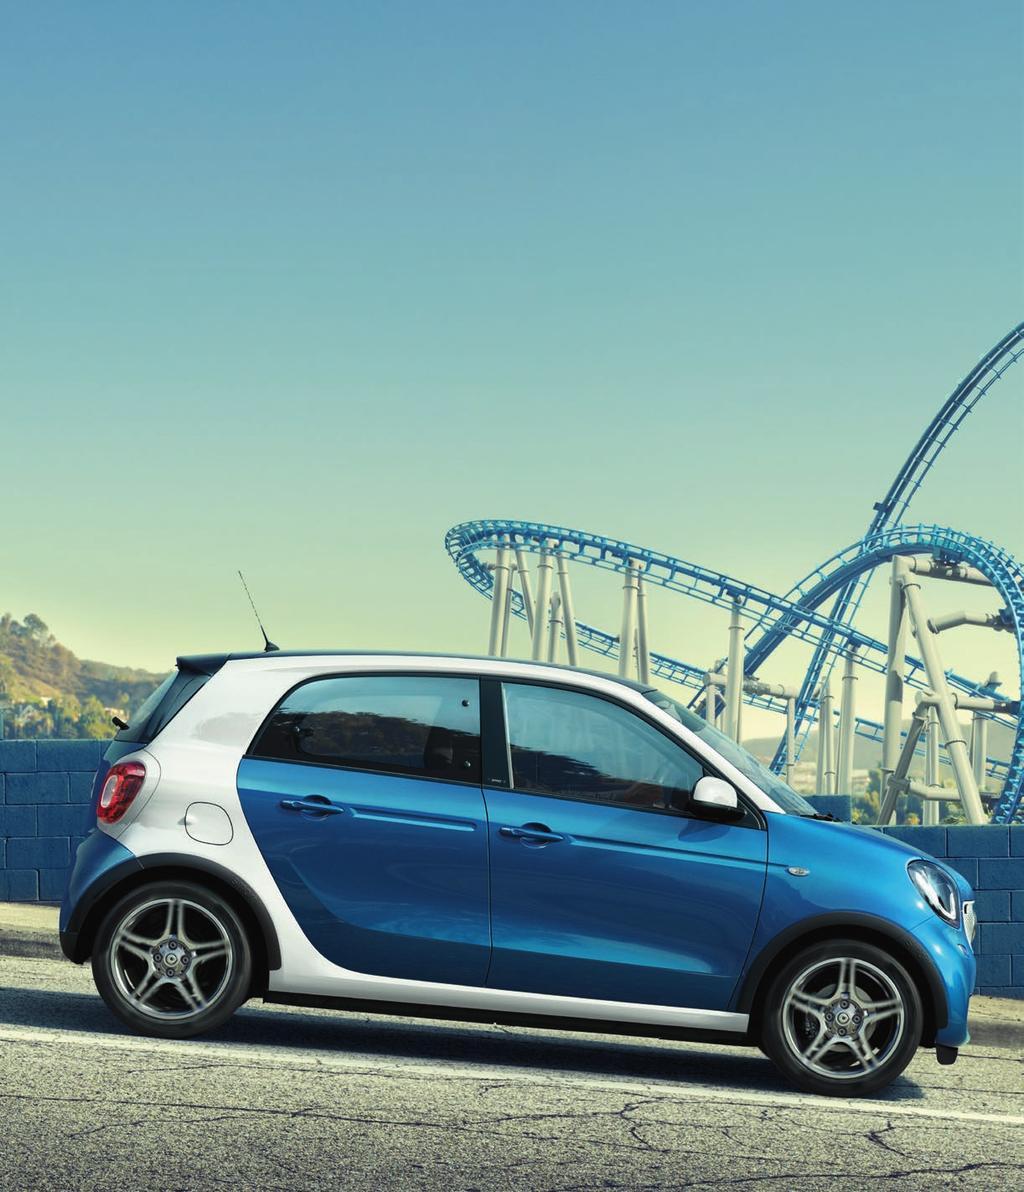 Thanks to the rear engine and rear-wheel drive the smart forfour is not only extremely compact with its manual transmission it also offers a whole lot of